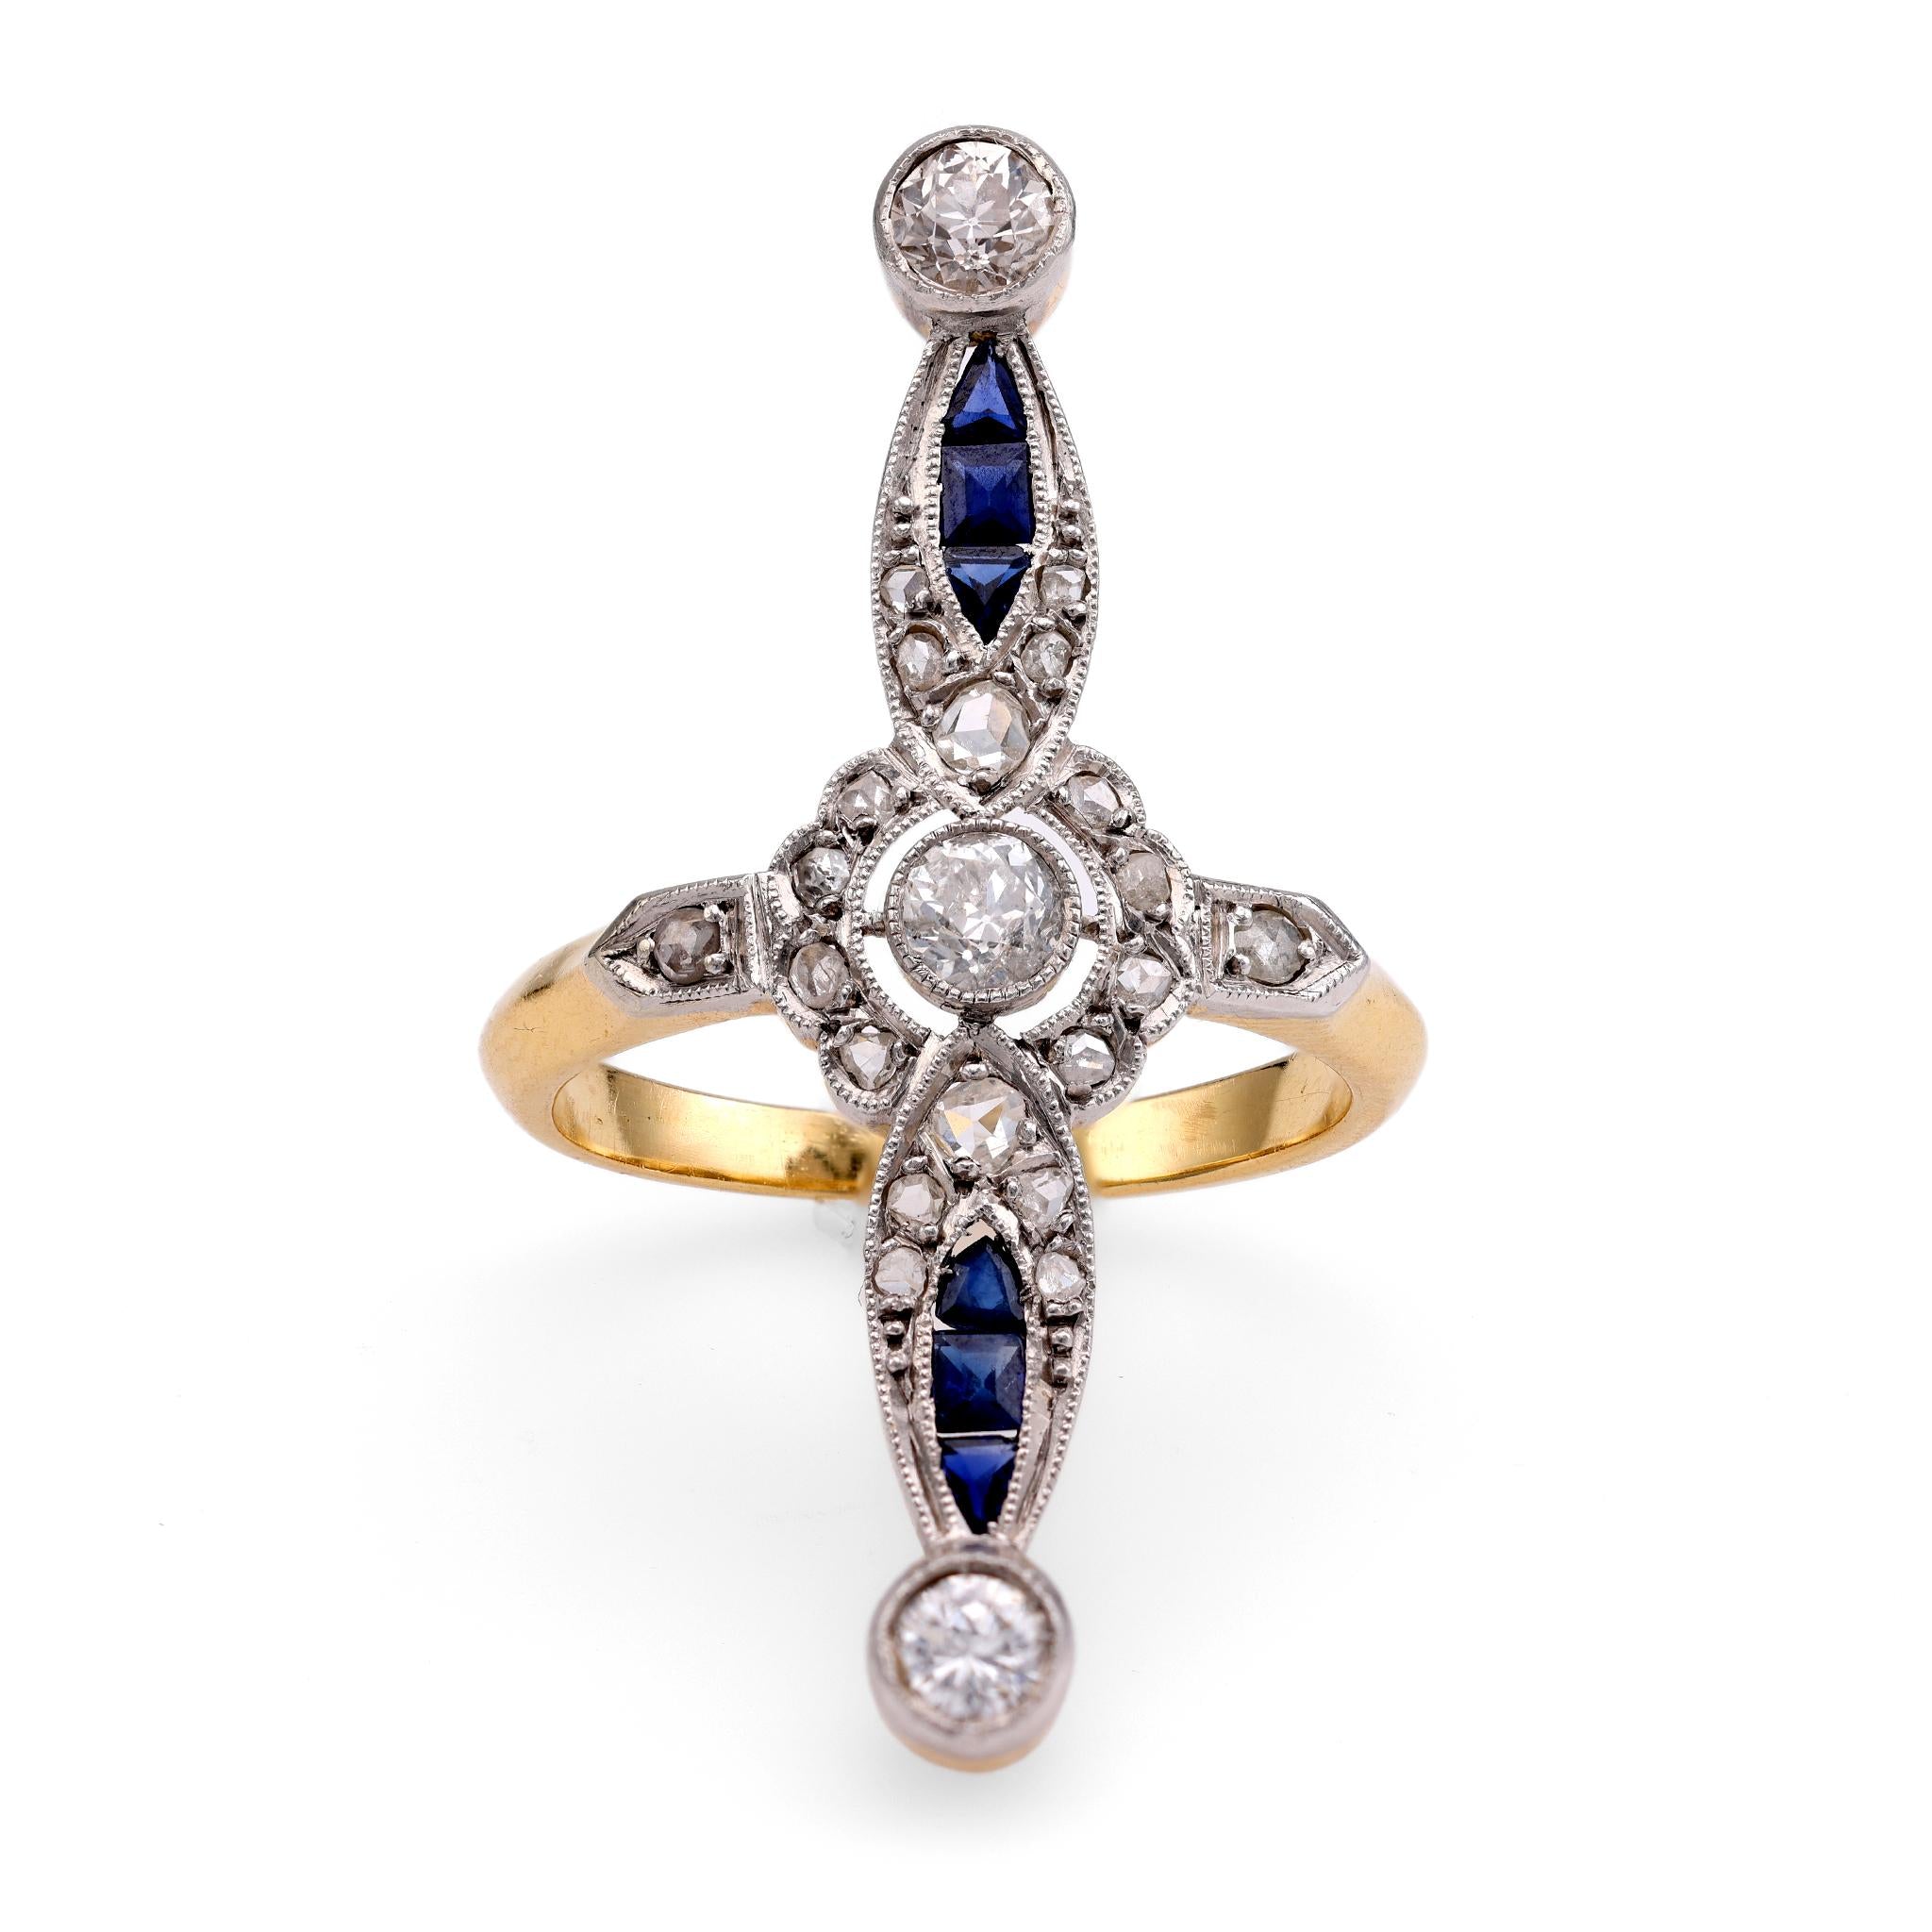 Belle Epoque Diamond and Sapphire Cocktail Ring  Jack Weir & Sons   